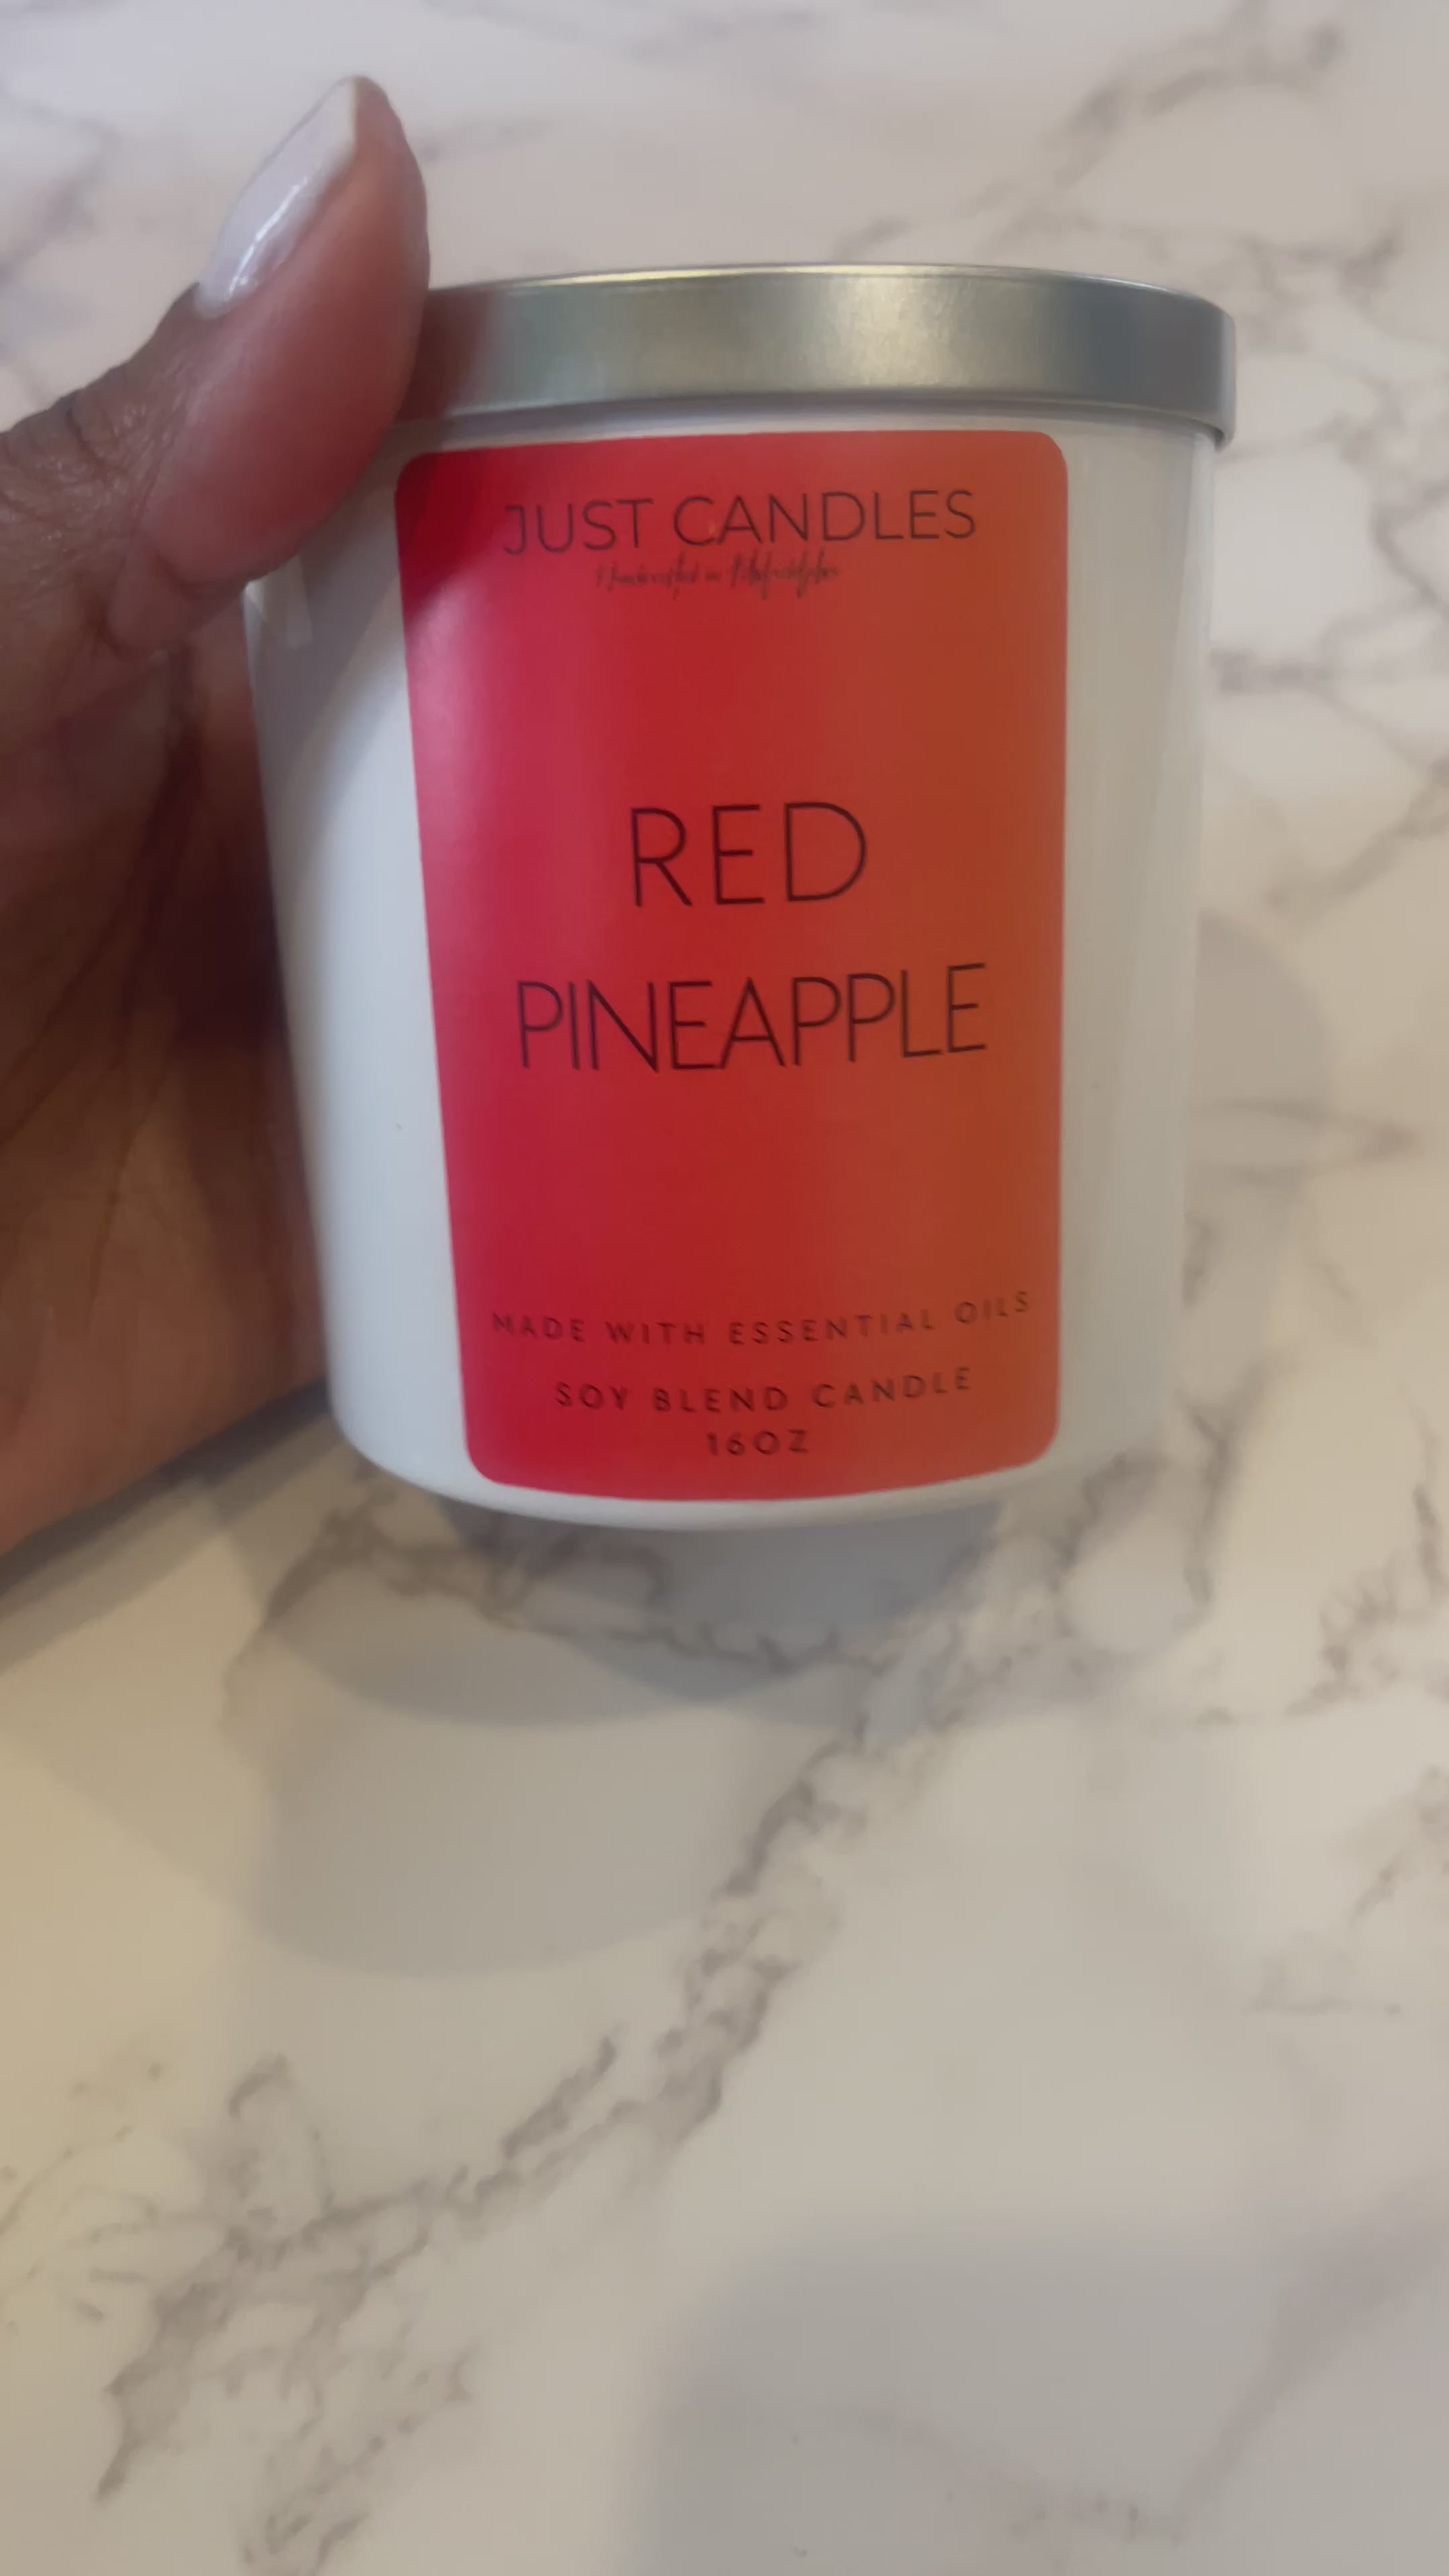 Red Pineapple Candle